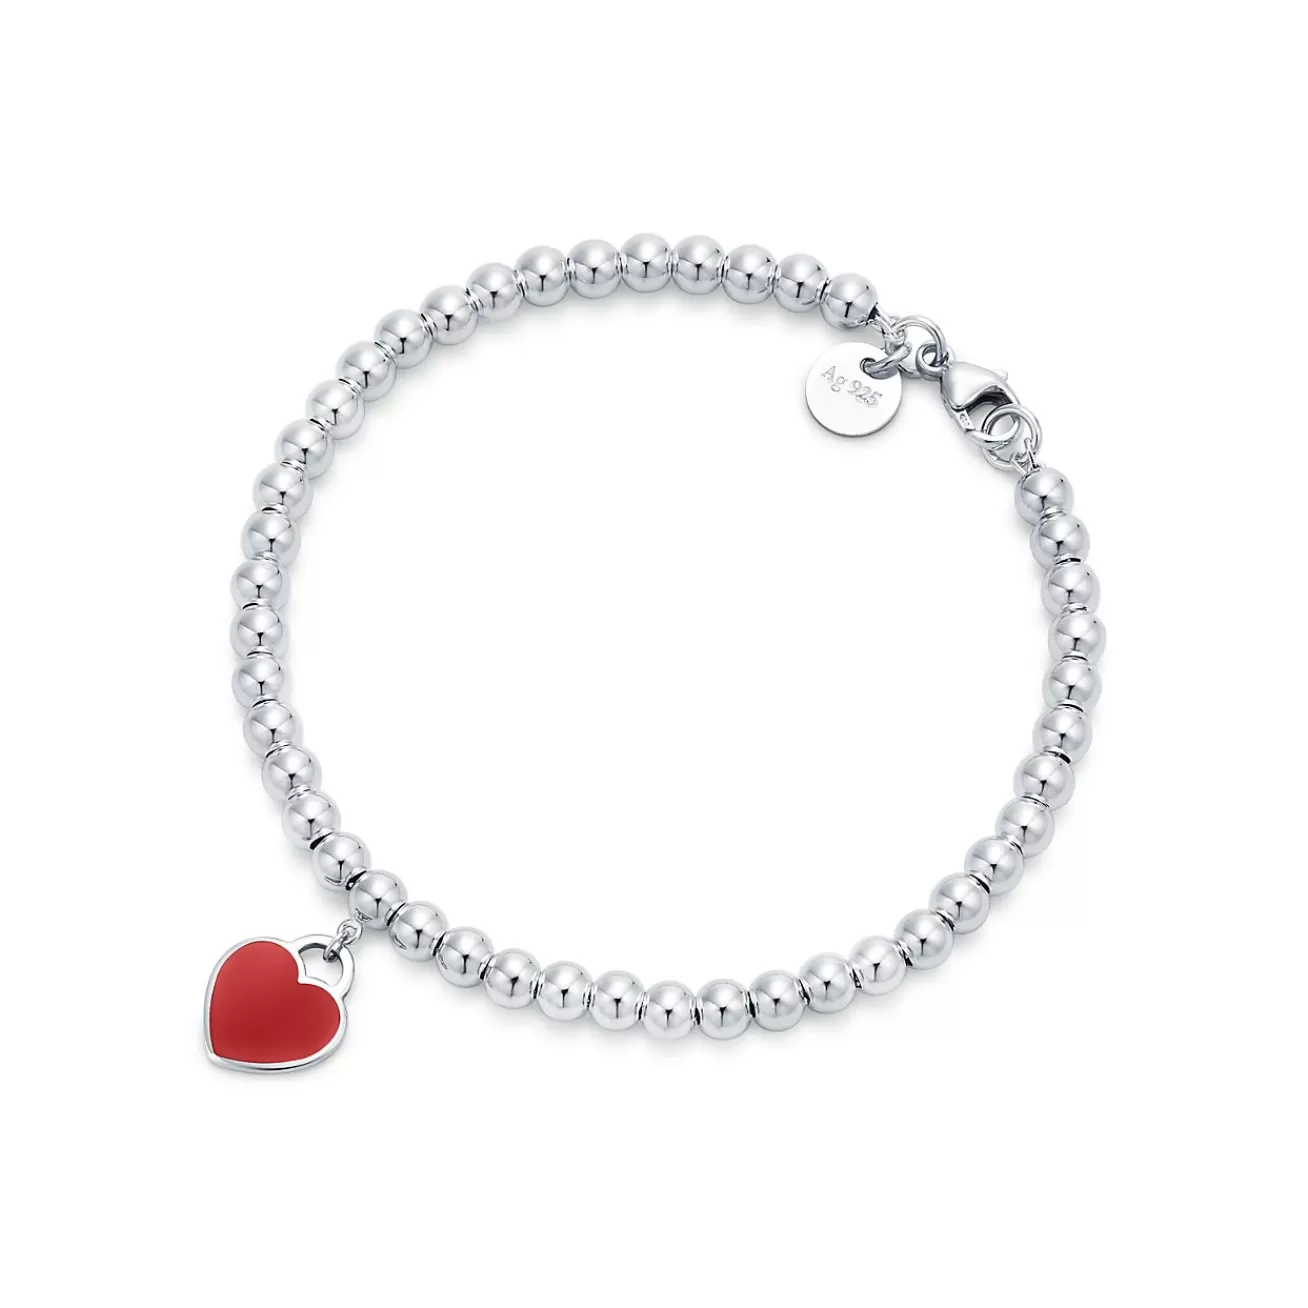 Tiffany & Co. Return to Tiffany® Red Heart Tag Bead Bracelet in Silver | ^ Bracelets | Gifts for Her